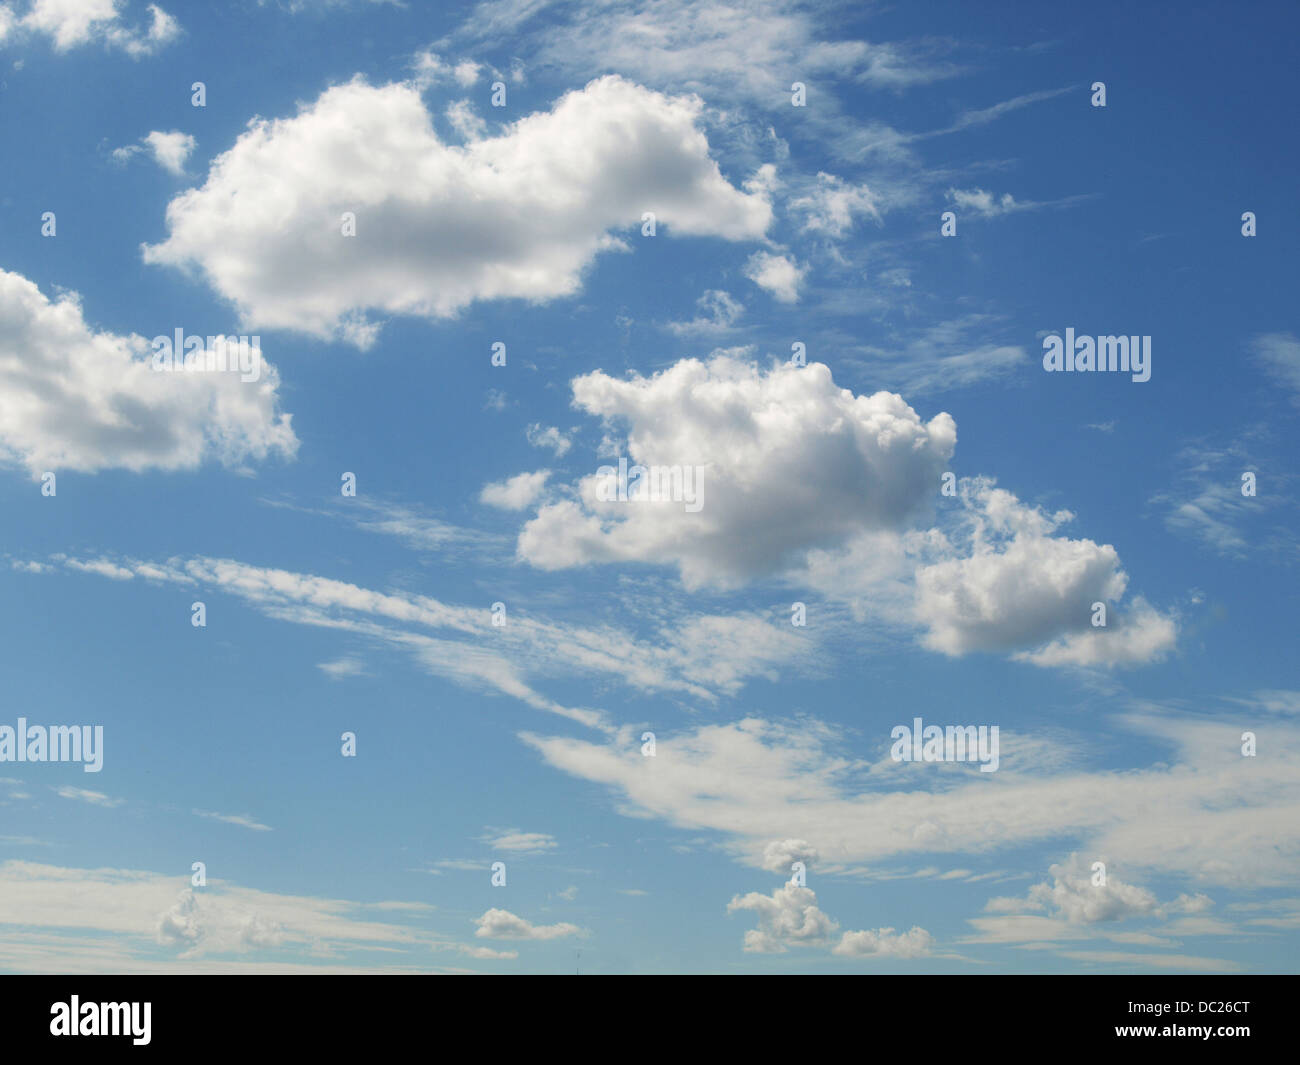 Background, blue summer sky with white clouds Stock Photo